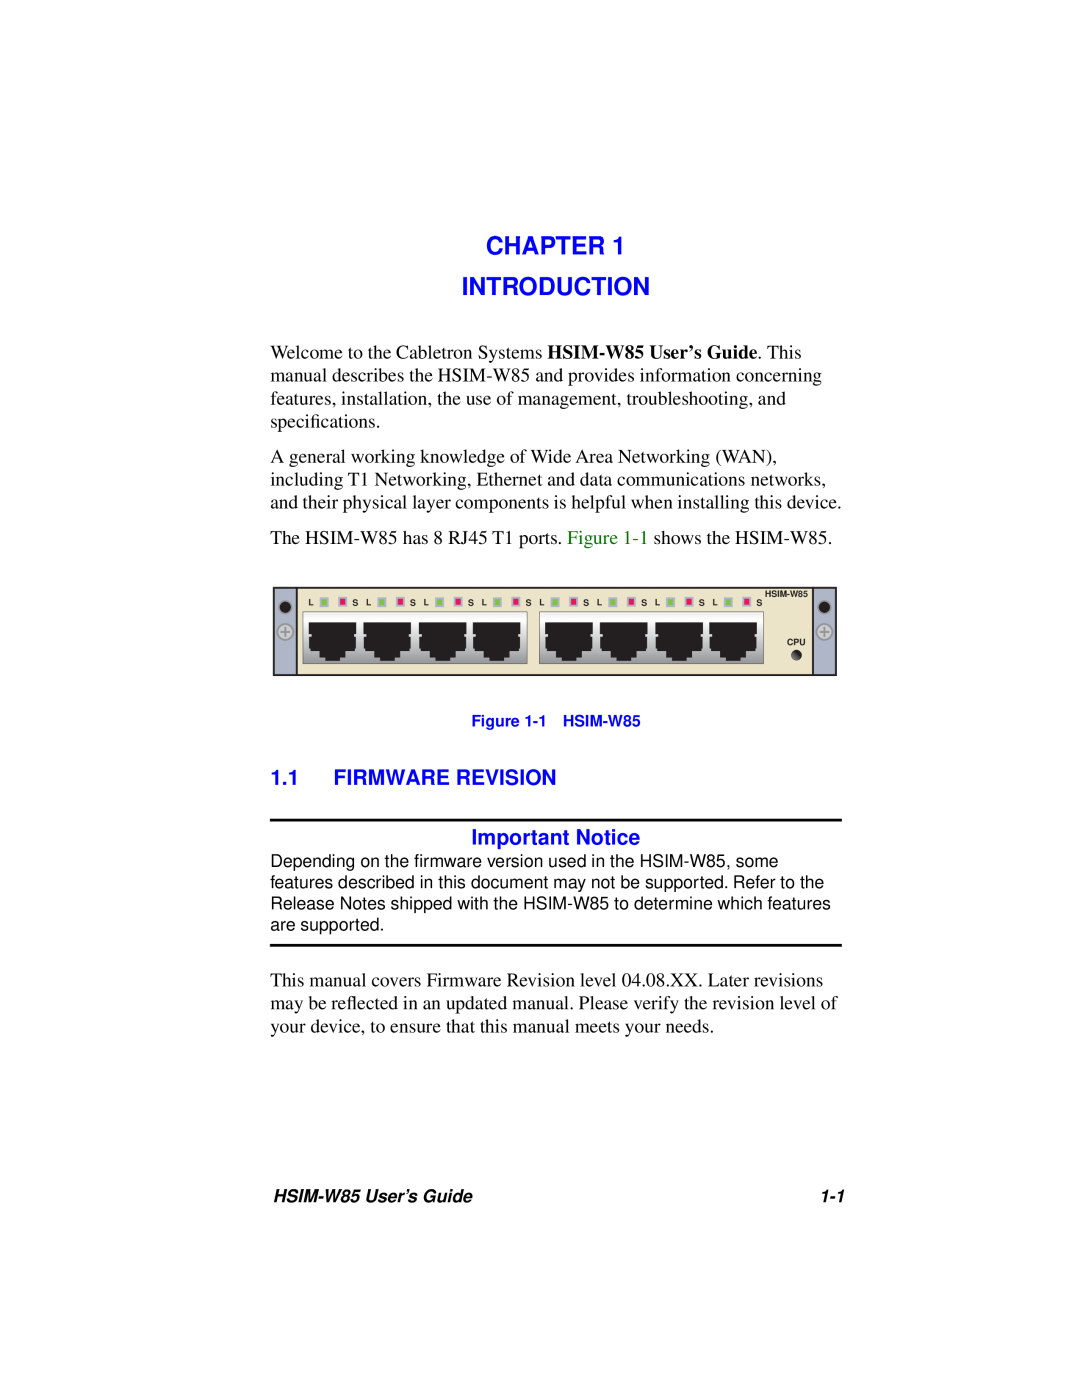 Cabletron Systems W85 manual Chapter Introduction, FIRMWARE REVISION Important Notice 